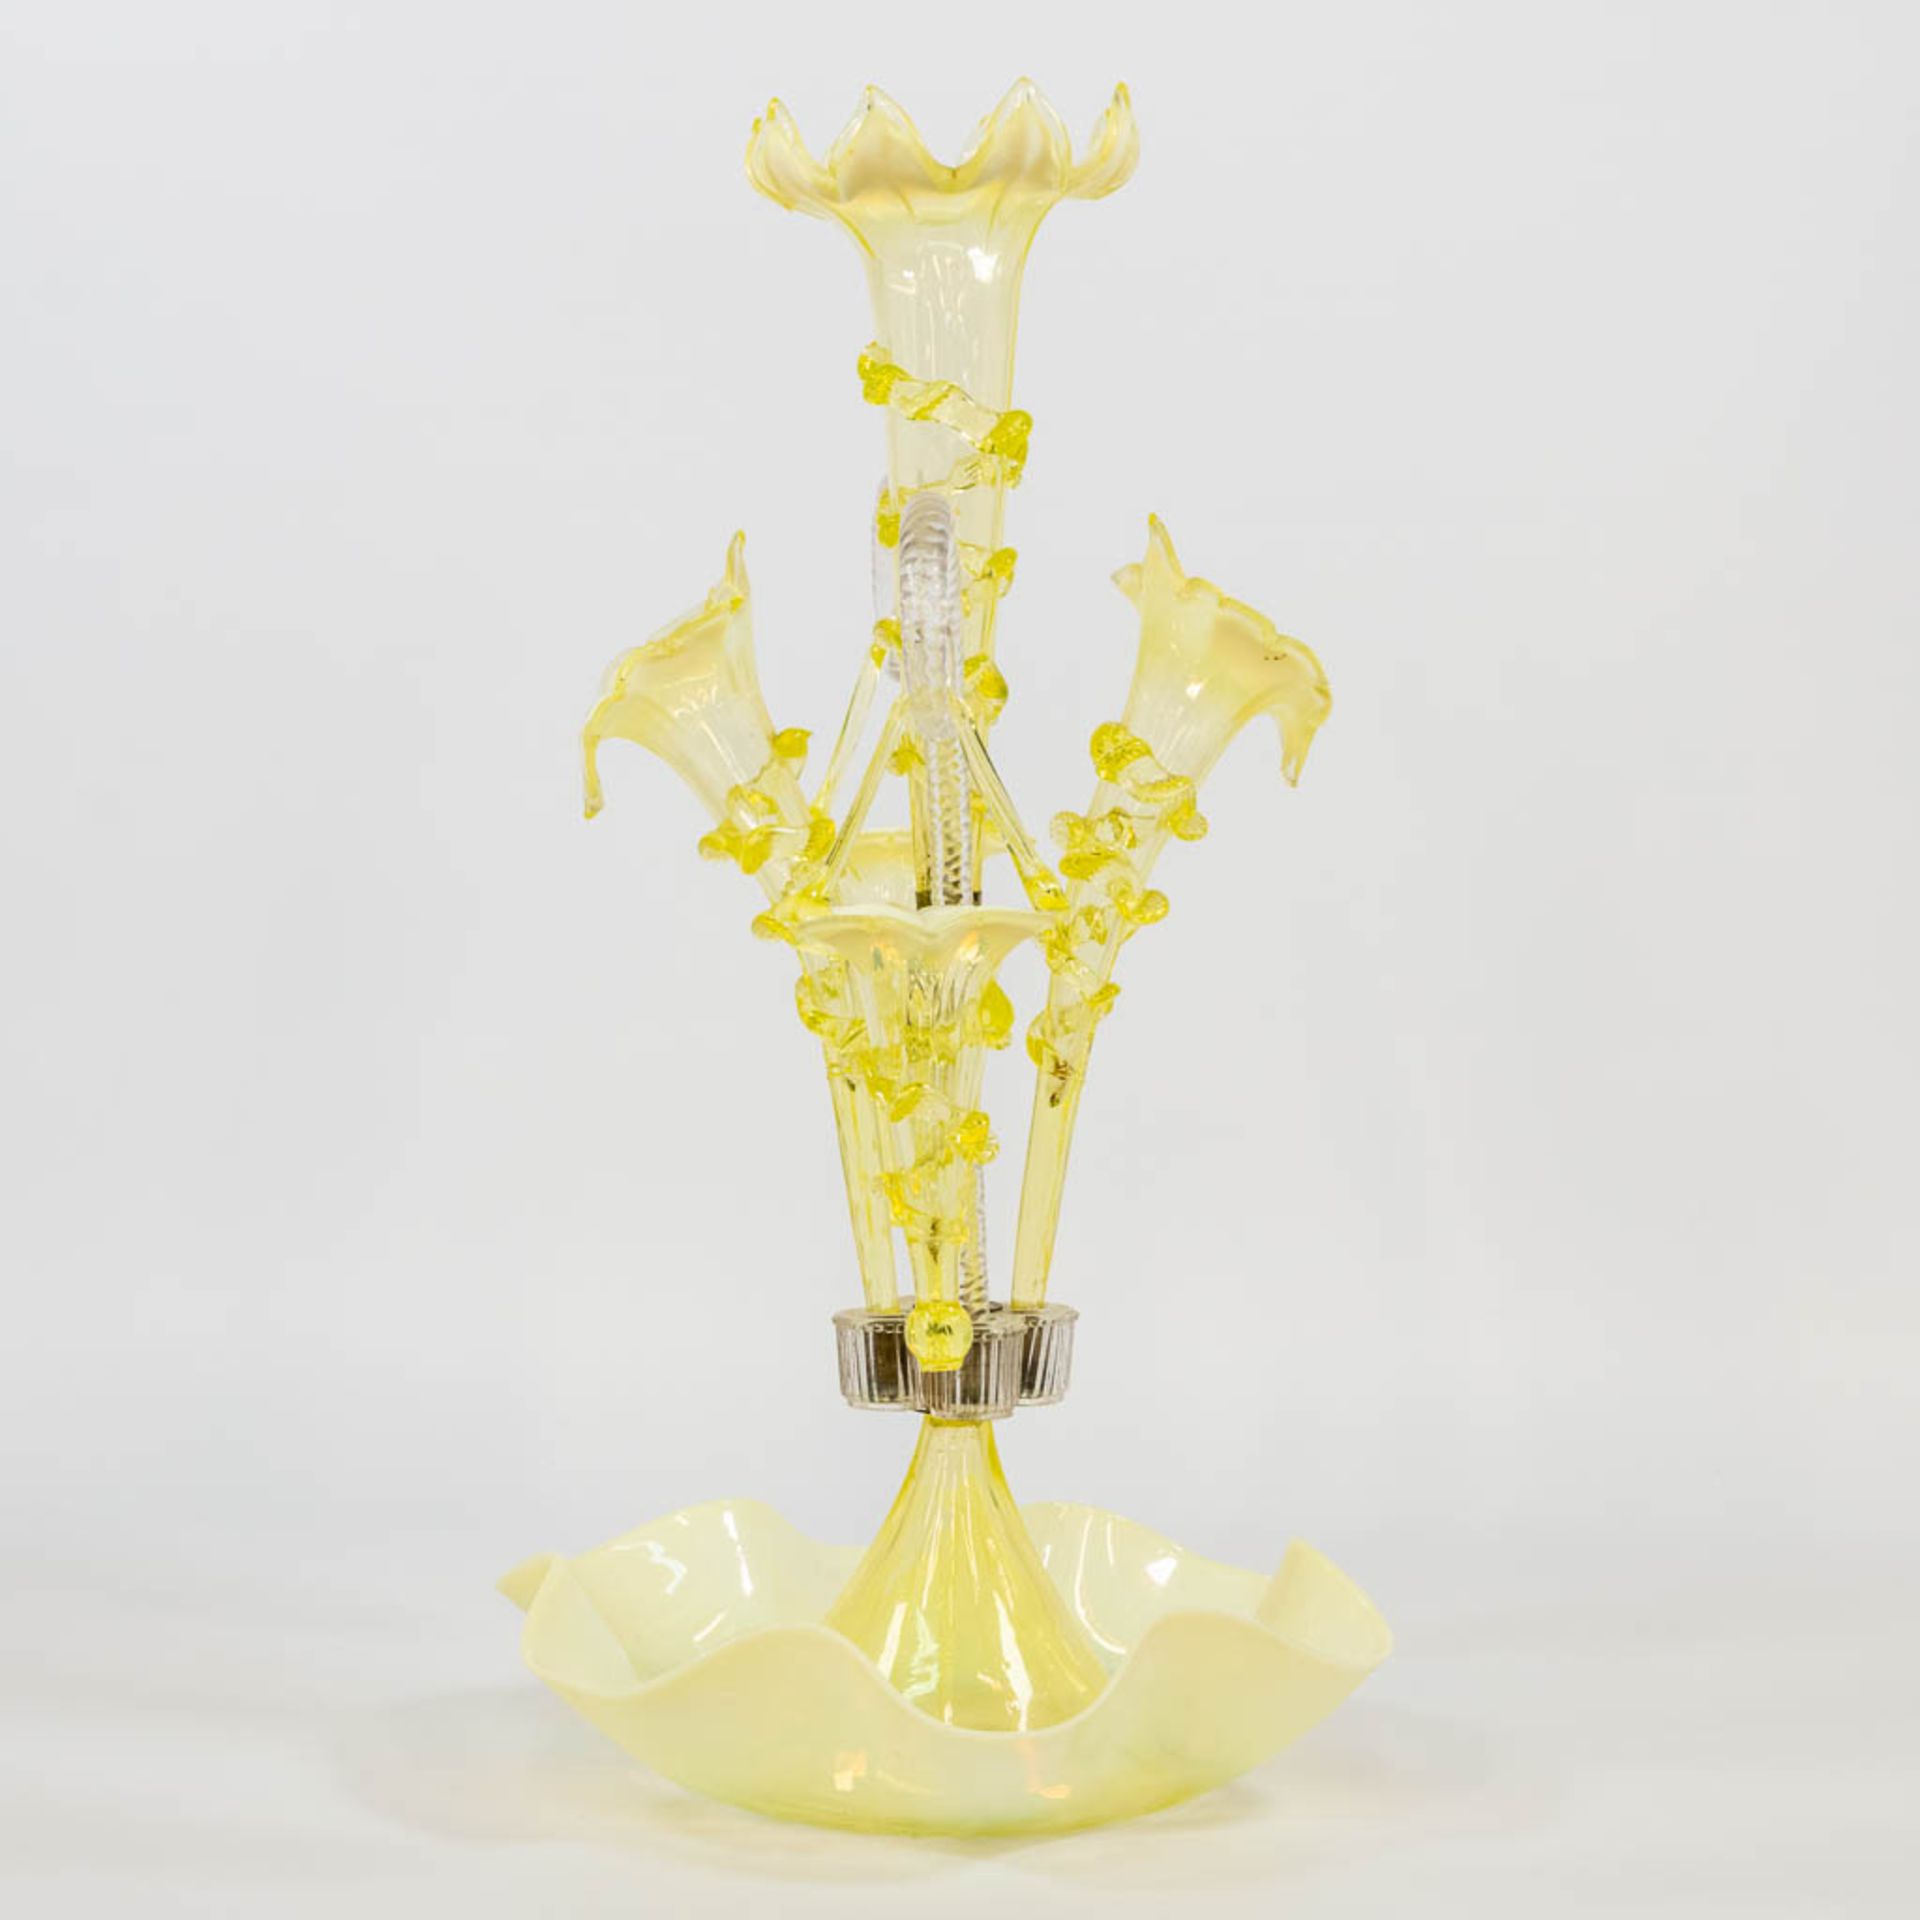 A yellow and clear glass table centrepiece pic-fleur, made in Murano, Italy. (25 x 28 x 45 cm) - Image 4 of 15